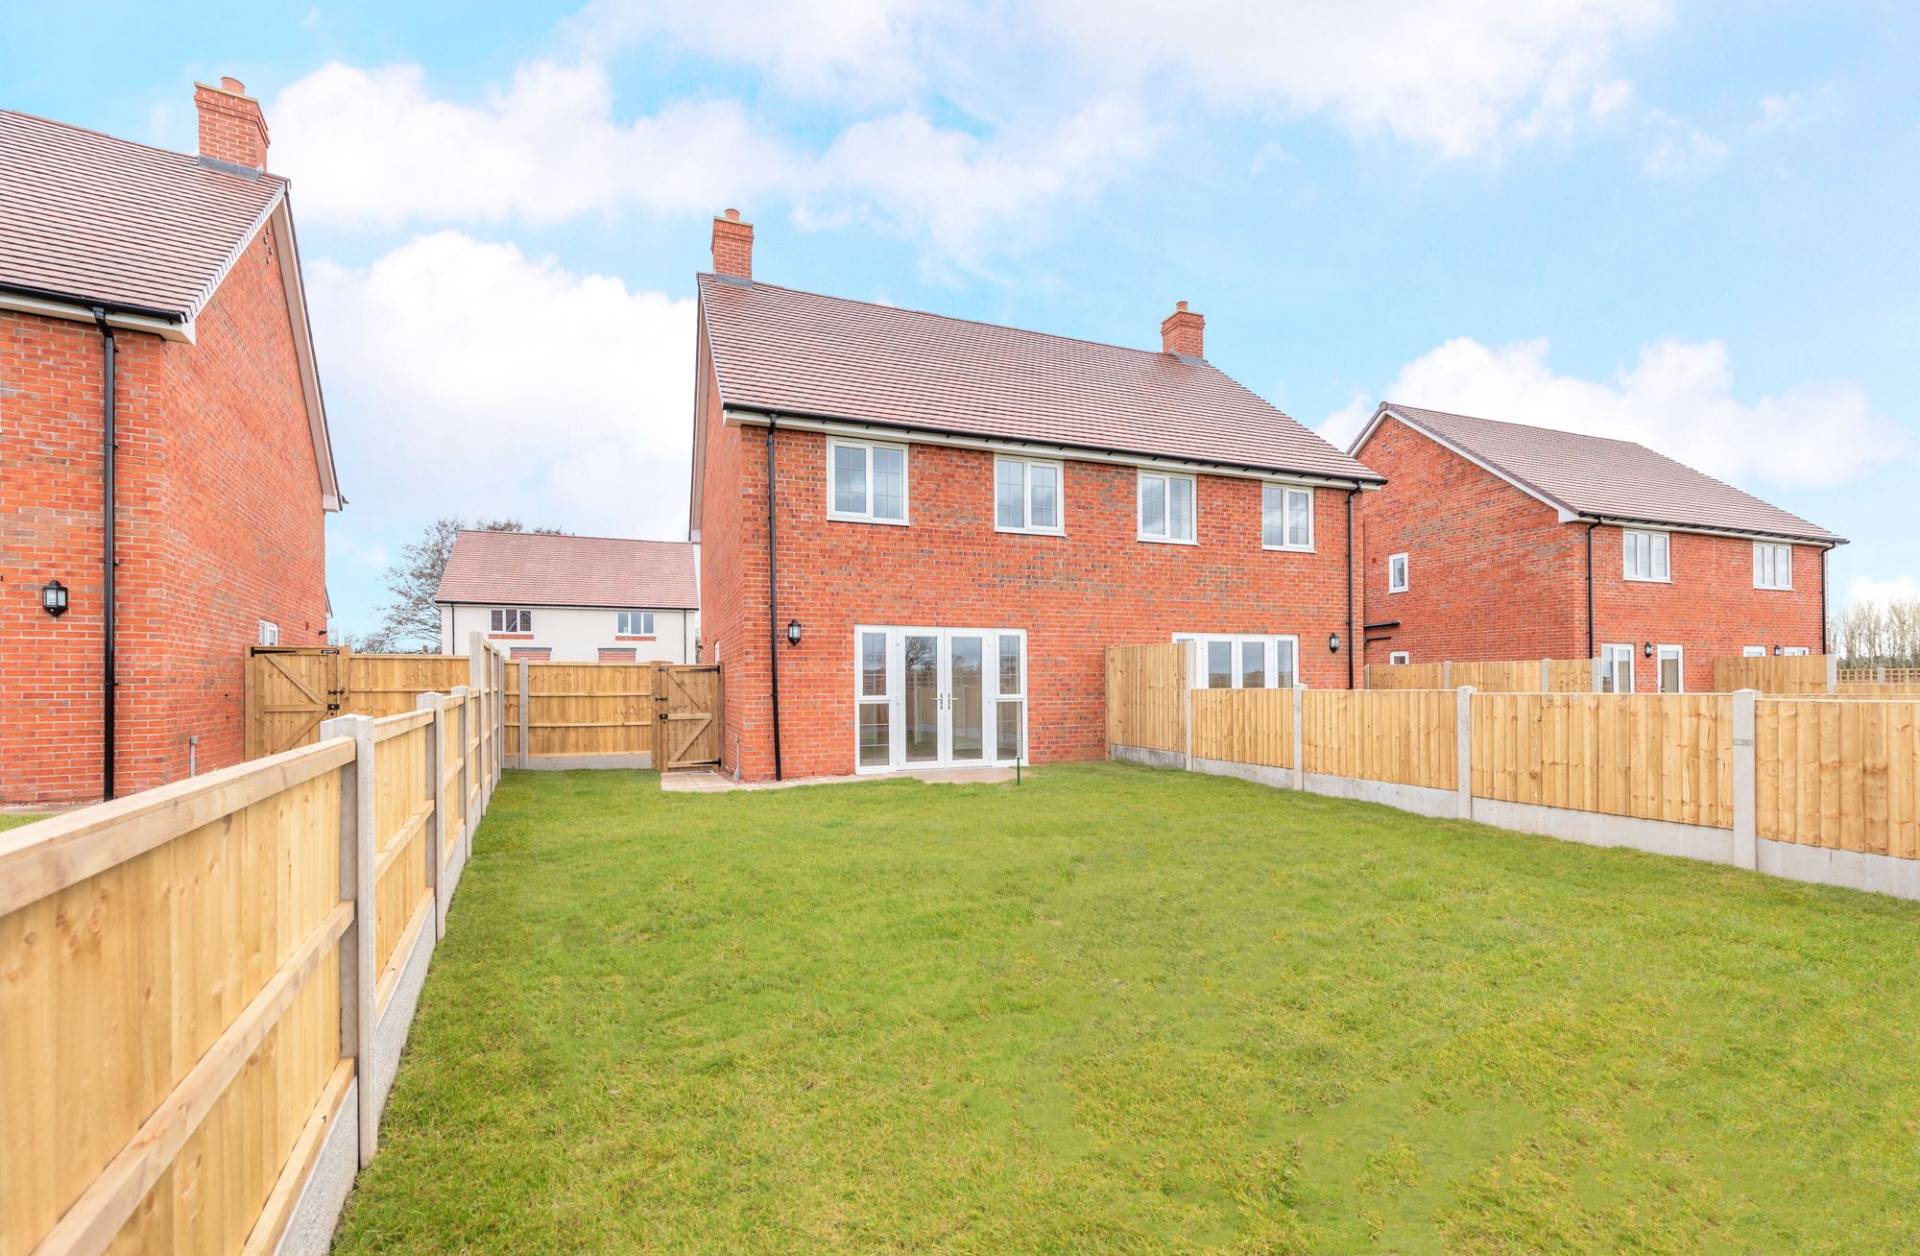 A development of 20 semi-detached two and three-bedroomed houses in Shawbury, Shropshire.  The contract with Floreat Housing Group, worth around £2.2million, began in March 2018 and is expected to complete in March 2019.